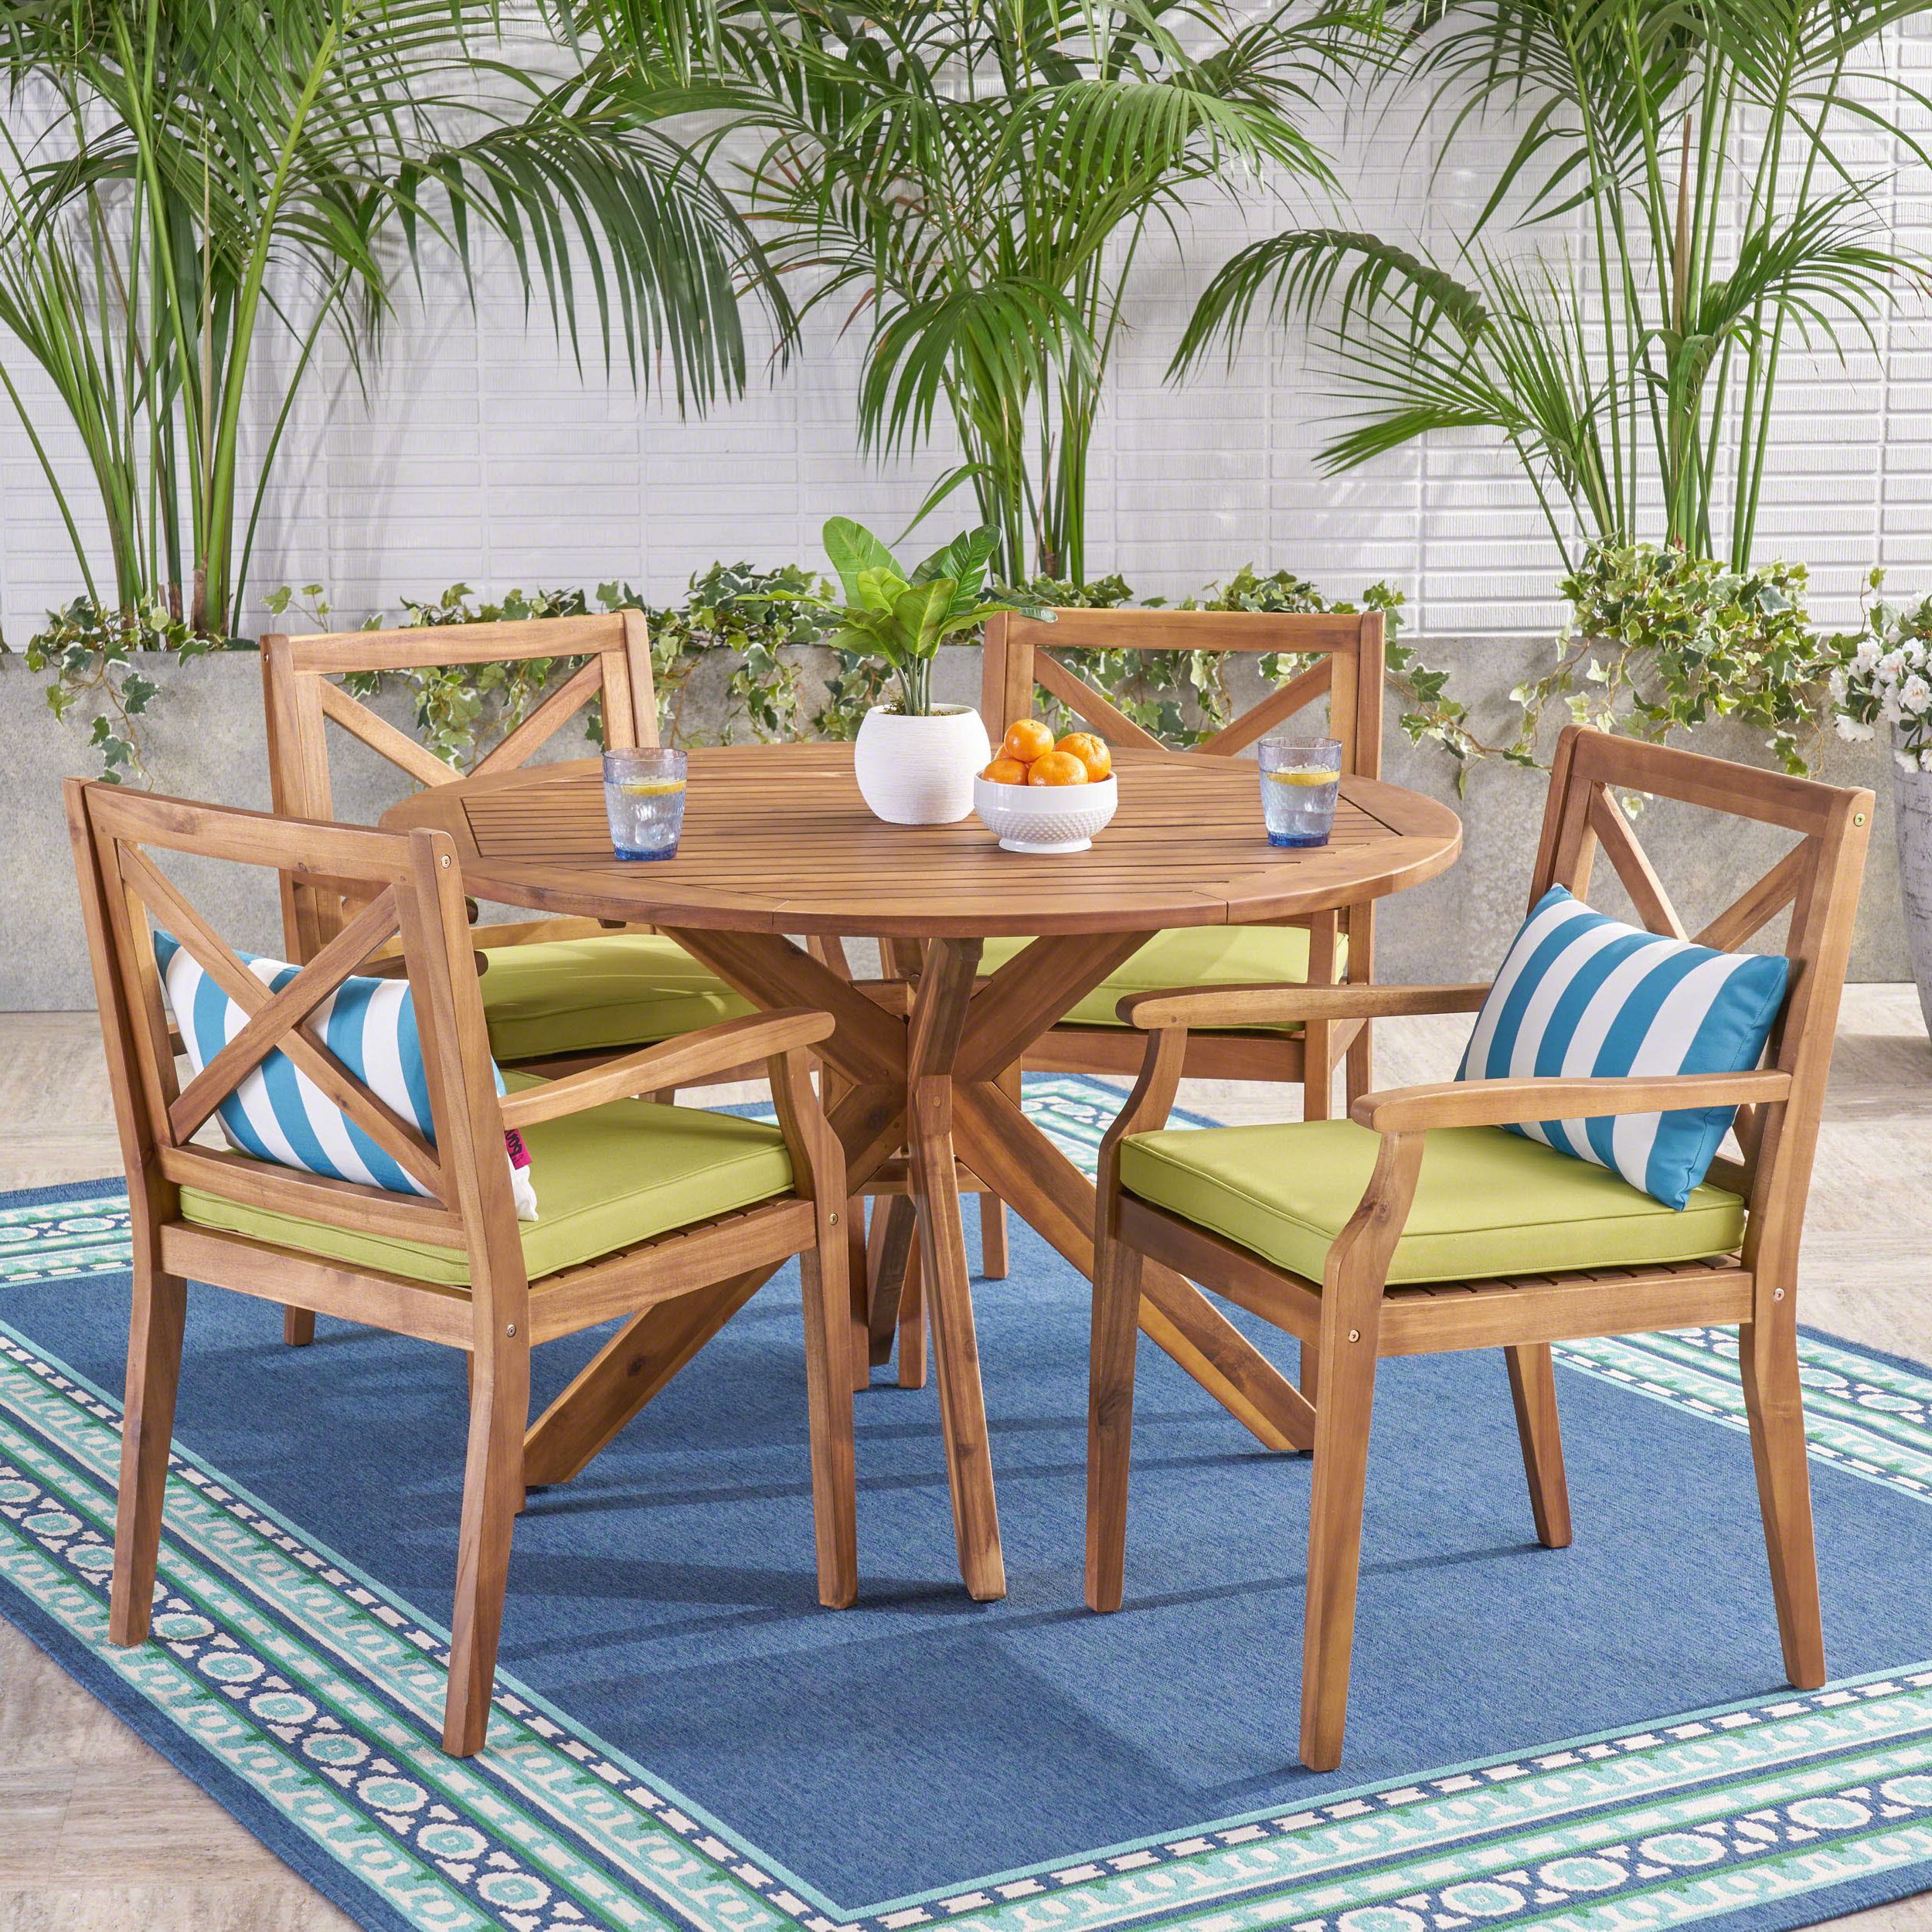 Most Popular Round 5 Piece Outdoor Patio Dining Sets Regarding Oakley Outdoor 5 Piece Acacia Wood Round Dining Set With Cushions, Teak (View 2 of 15)